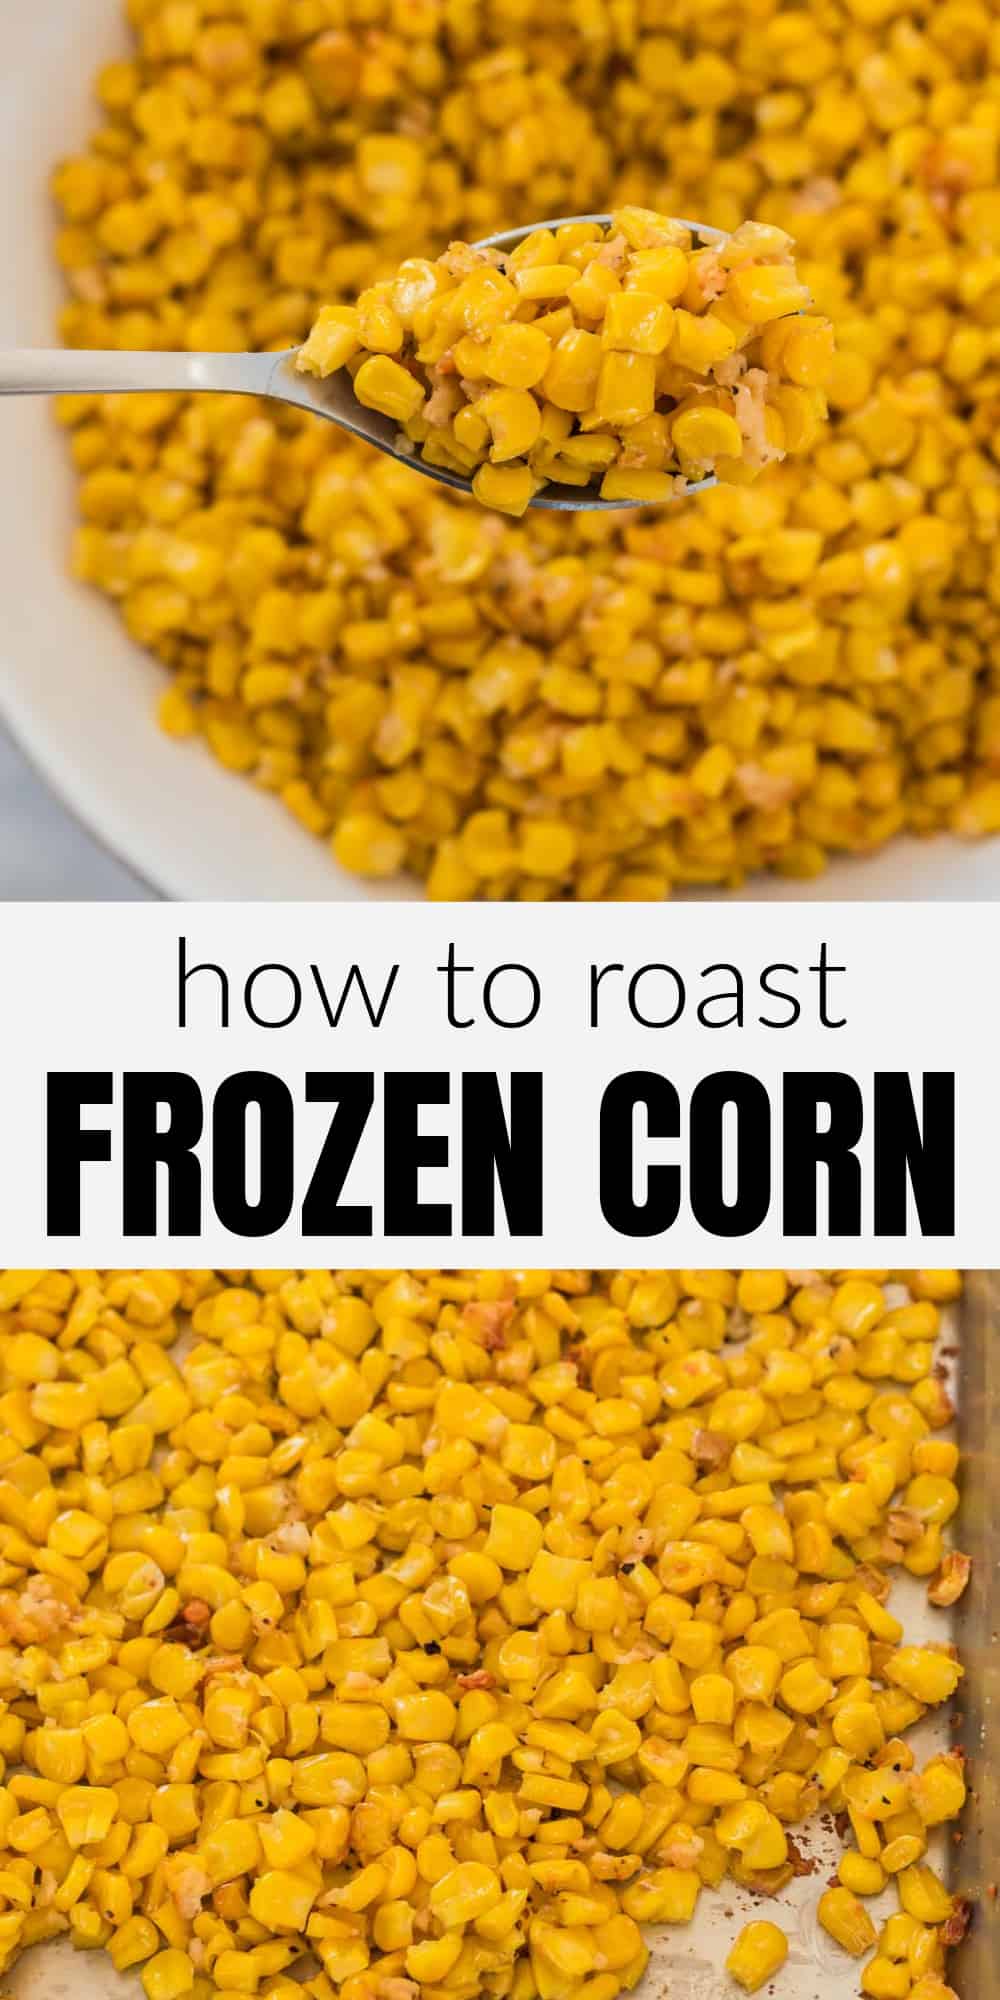 image with text "how to roast frozen corn"